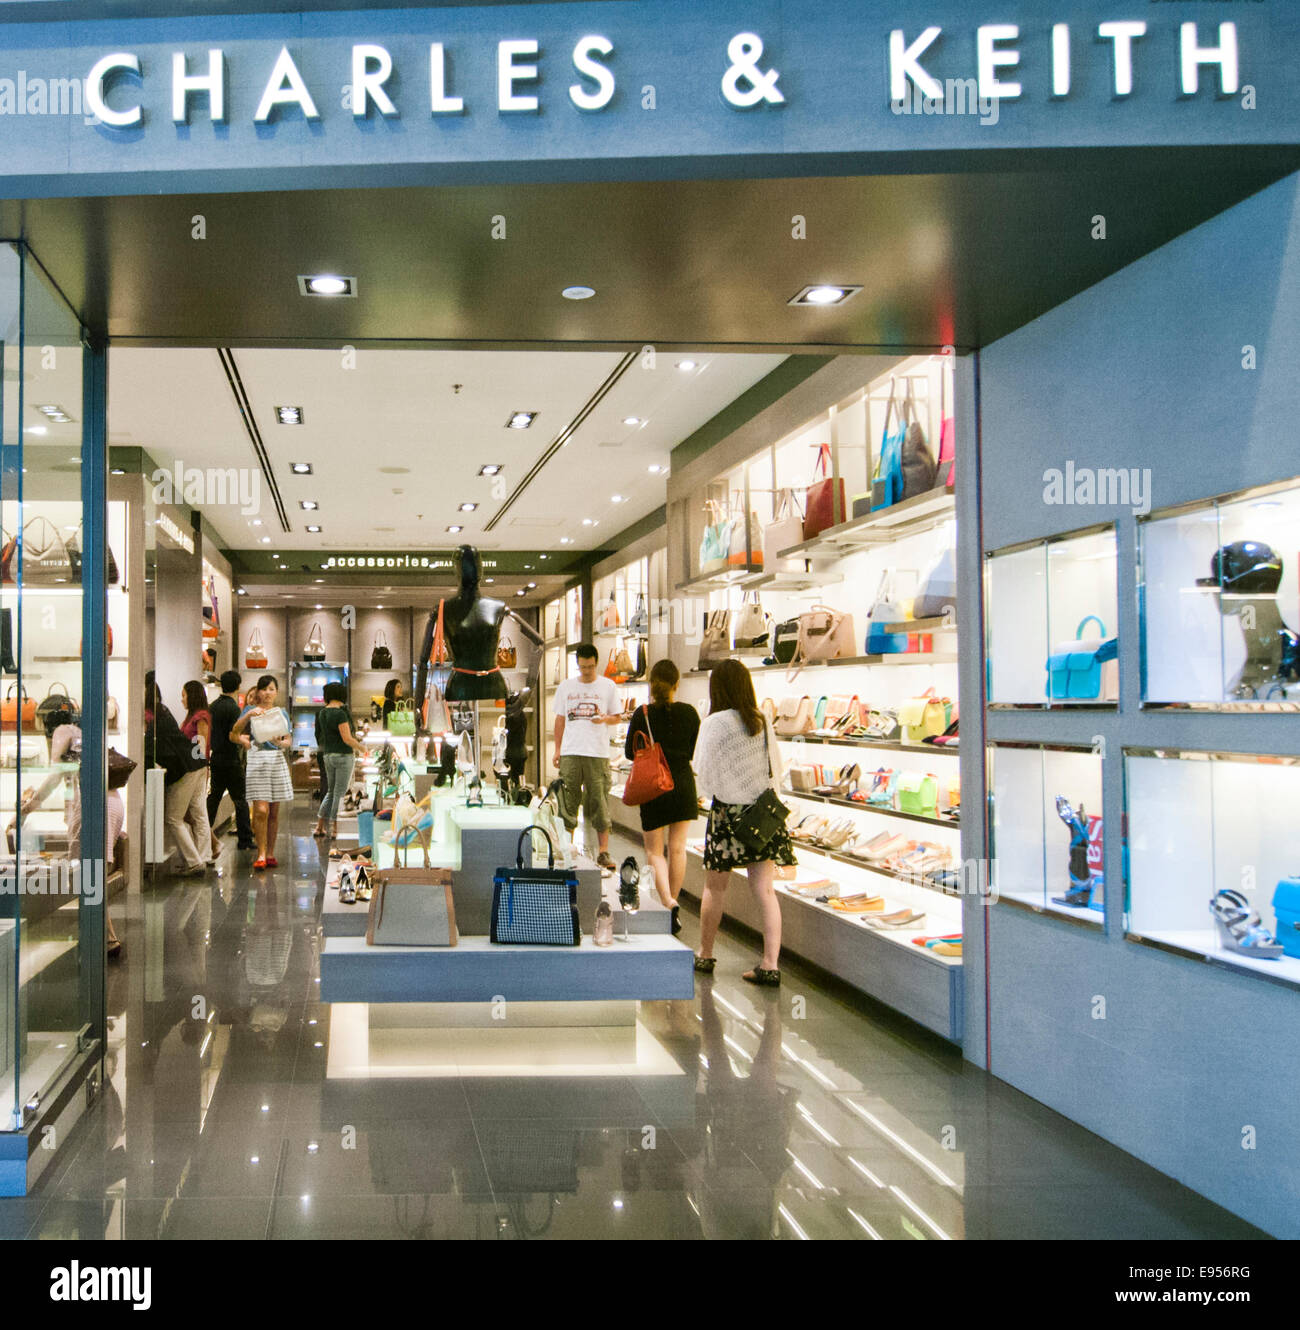 Charles and Keith in Thailand Stock Photo - Alamy